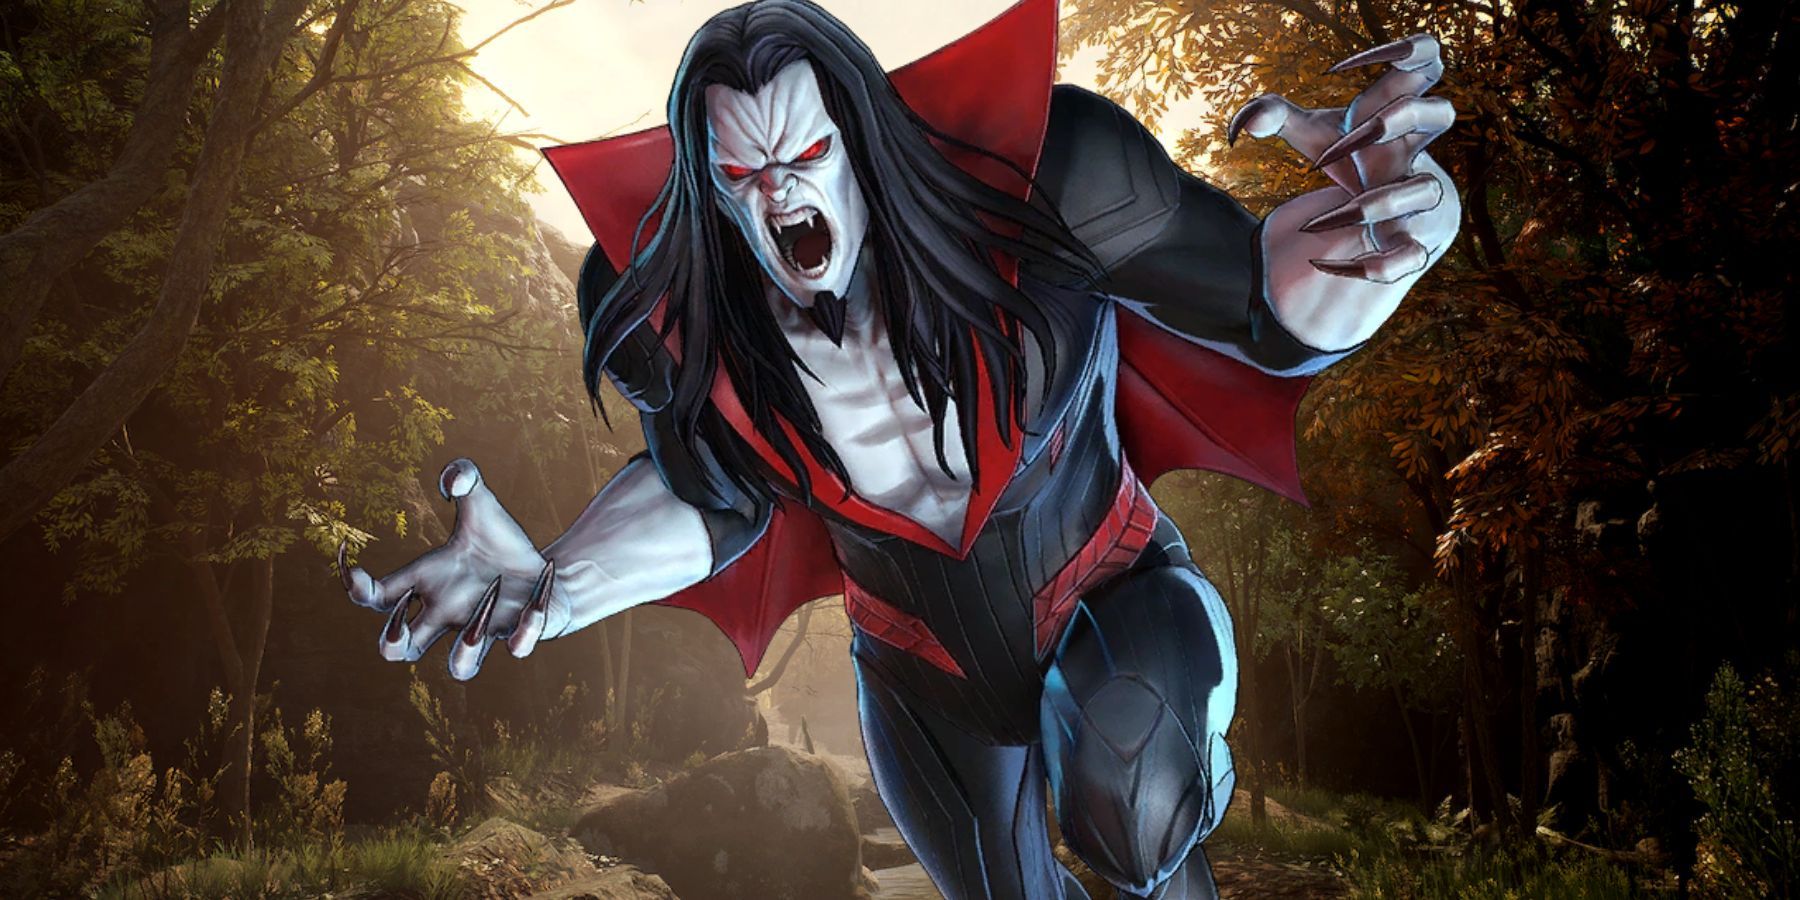 Dr. Michael Morbius joins the crew in Marvel's Midnight Suns - My